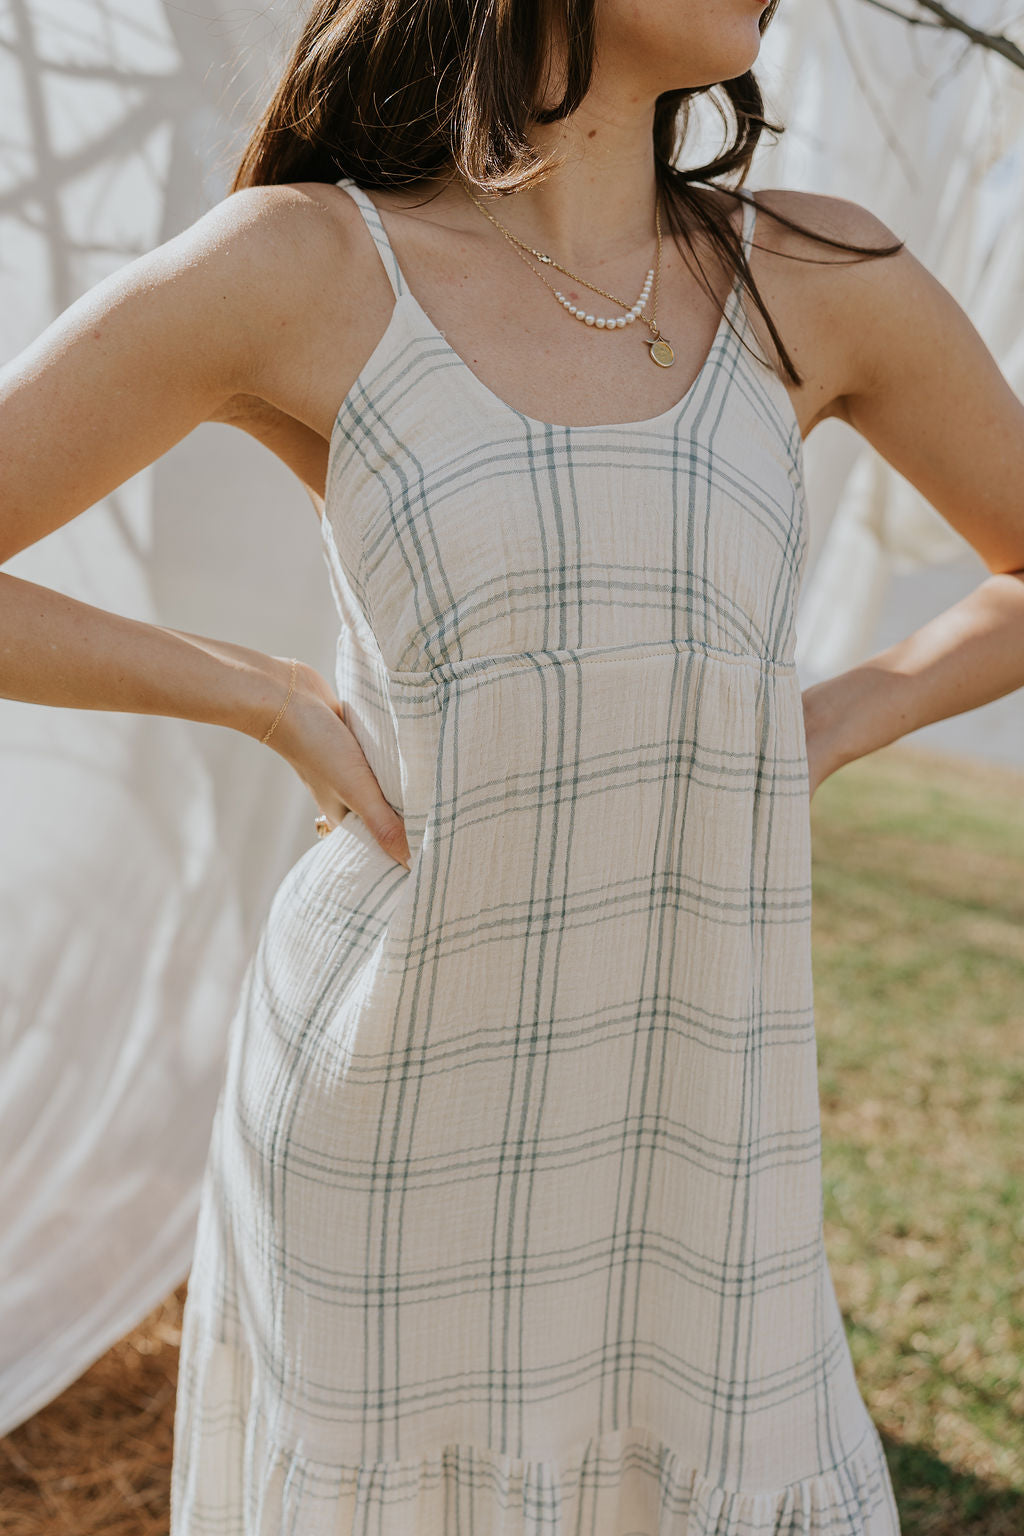 Close upper body front view of female model wearing the Milana Ivory & Blue Plaid Maxi Dress that has ivory fabric with blue plaid, spaghetti straps, tiered skirt, and ties in the back.